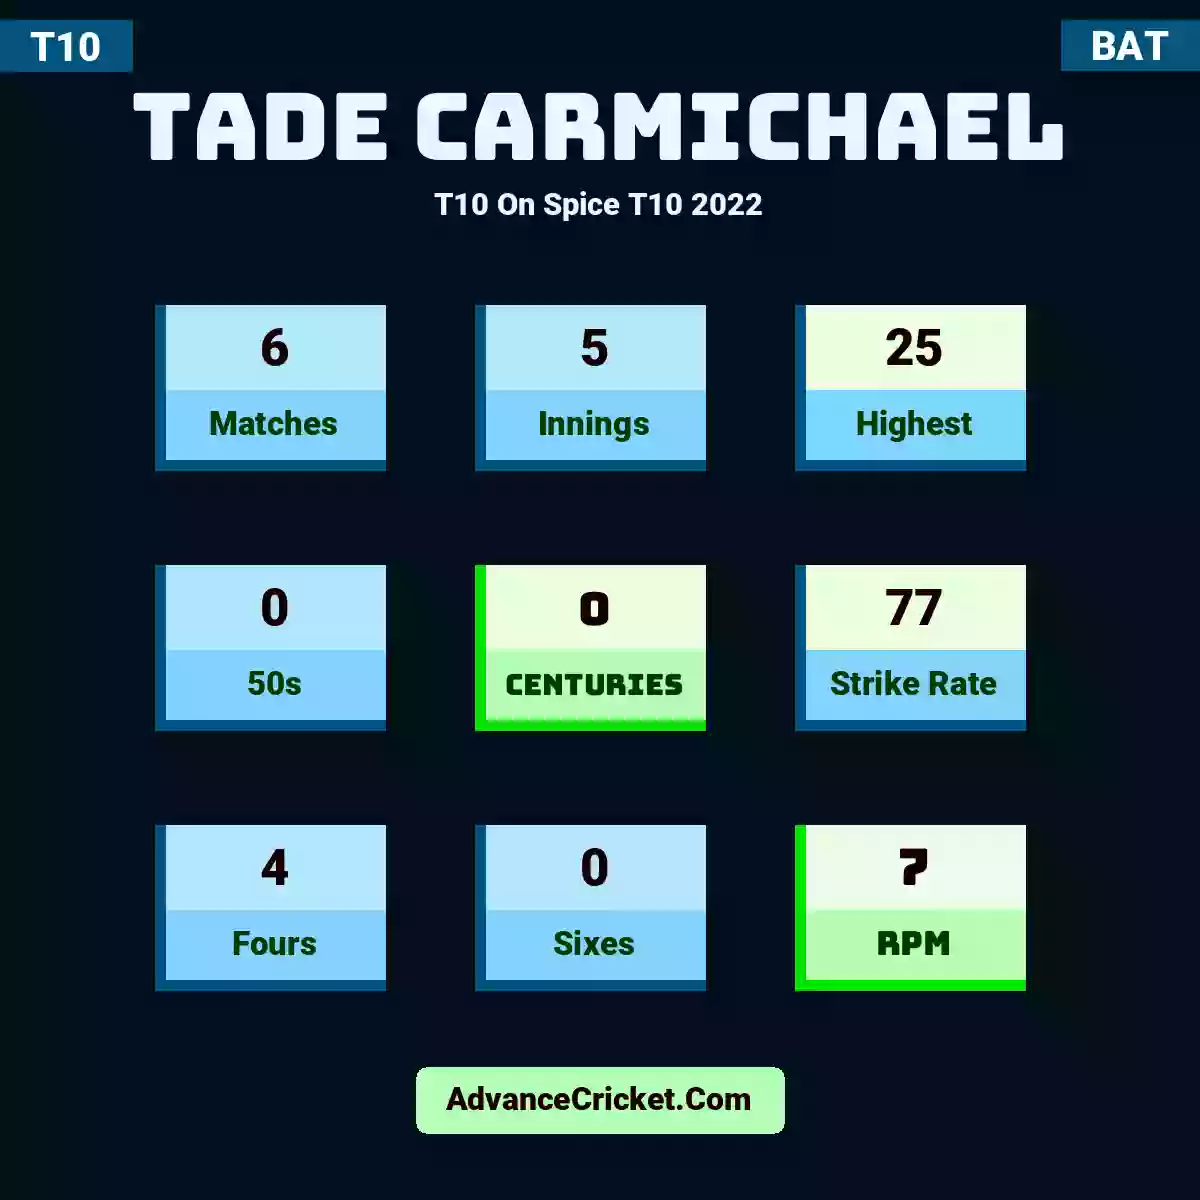 Tade Carmichael T10  On Spice T10 2022, Tade Carmichael played 6 matches, scored 25 runs as highest, 0 half-centuries, and 0 centuries, with a strike rate of 77. T.Carmichael hit 4 fours and 0 sixes, with an RPM of 7.